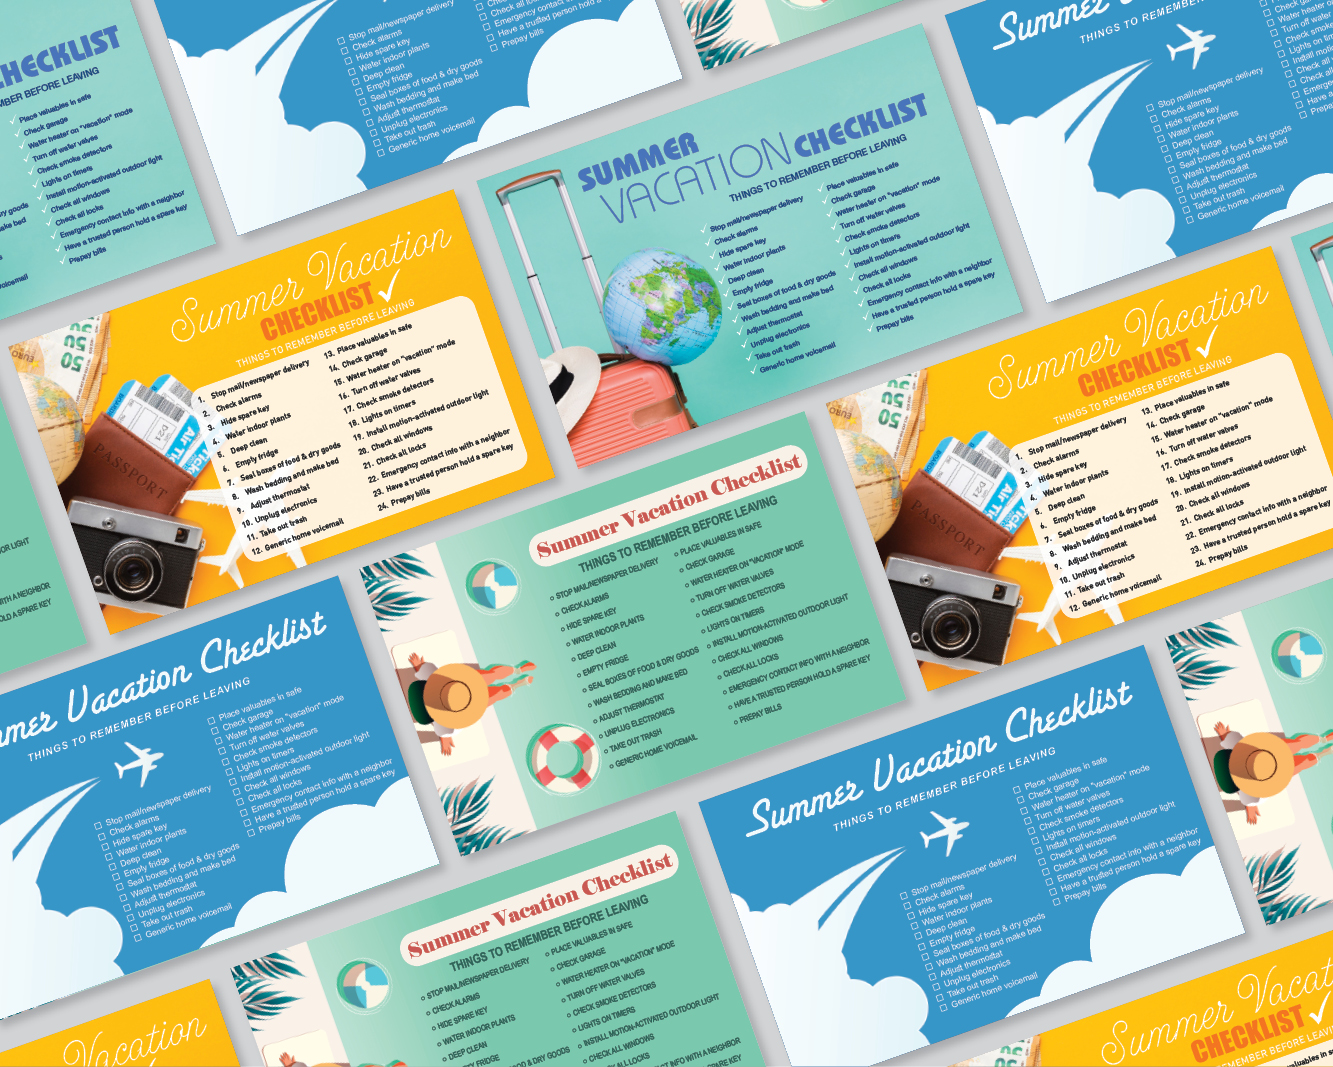 Examples of Summer Vacation Checklist Postcards